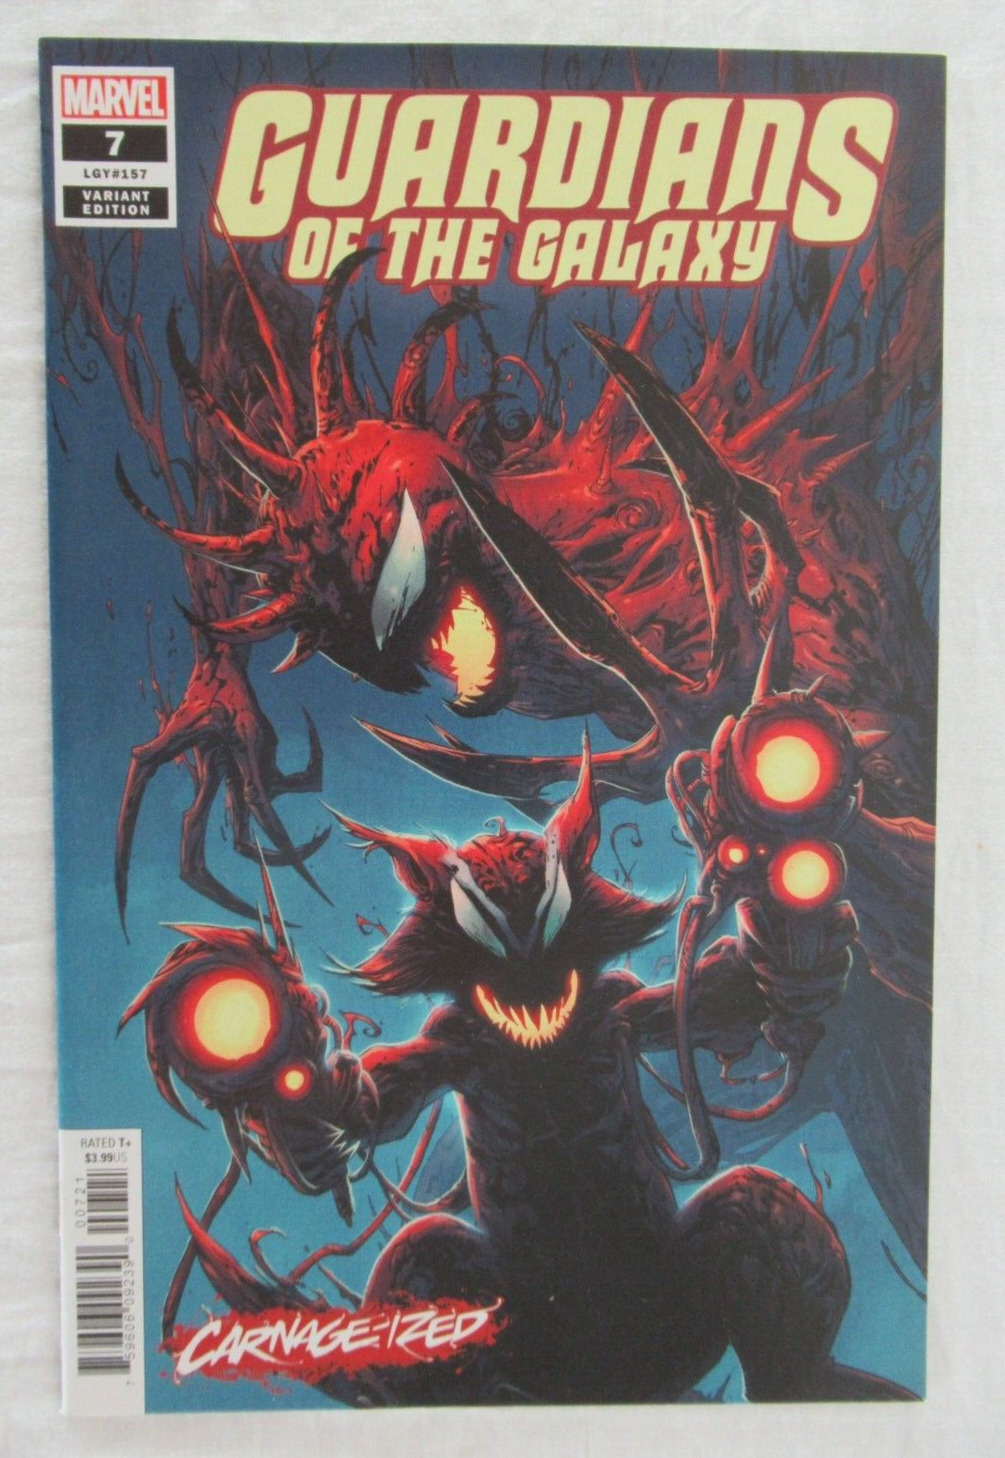 Guardians of the Galaxy #7 (Legacy #157) Carnage-ized Variant Marvel Comics 2019